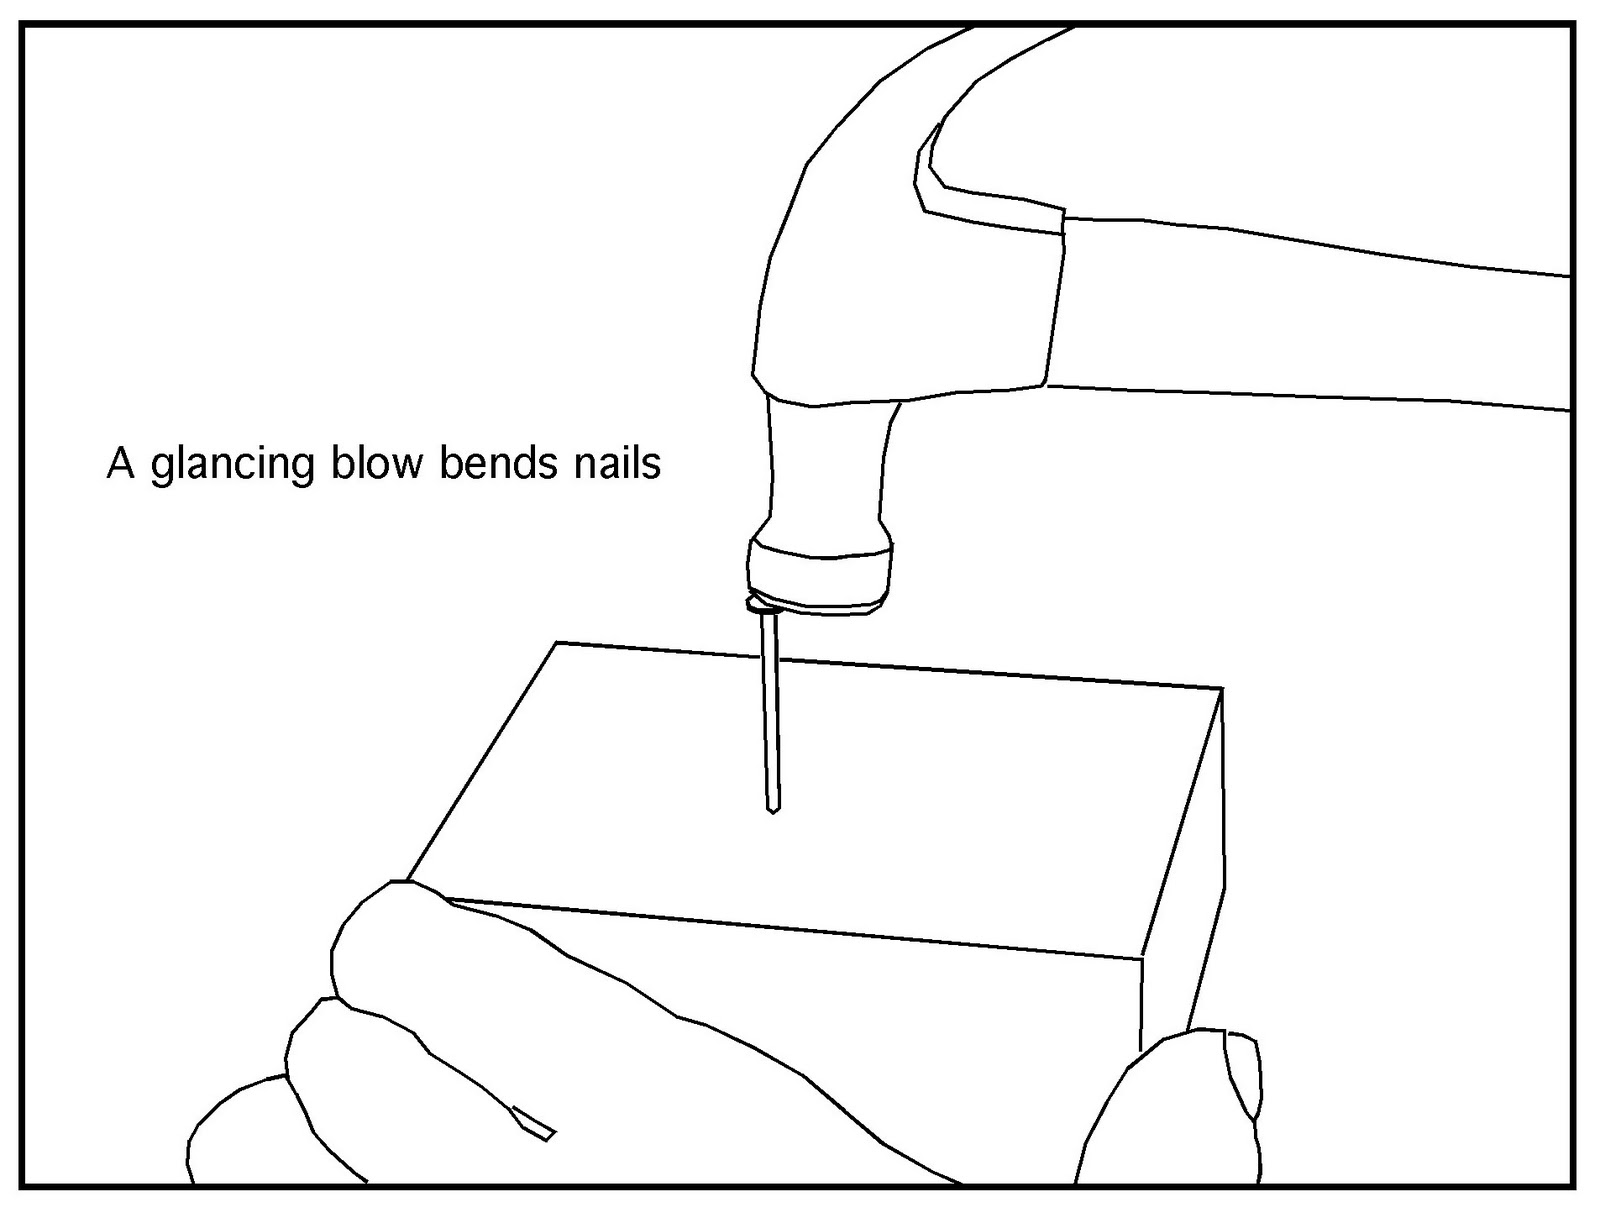 Wisdom of the Hands: How to bend a nail...